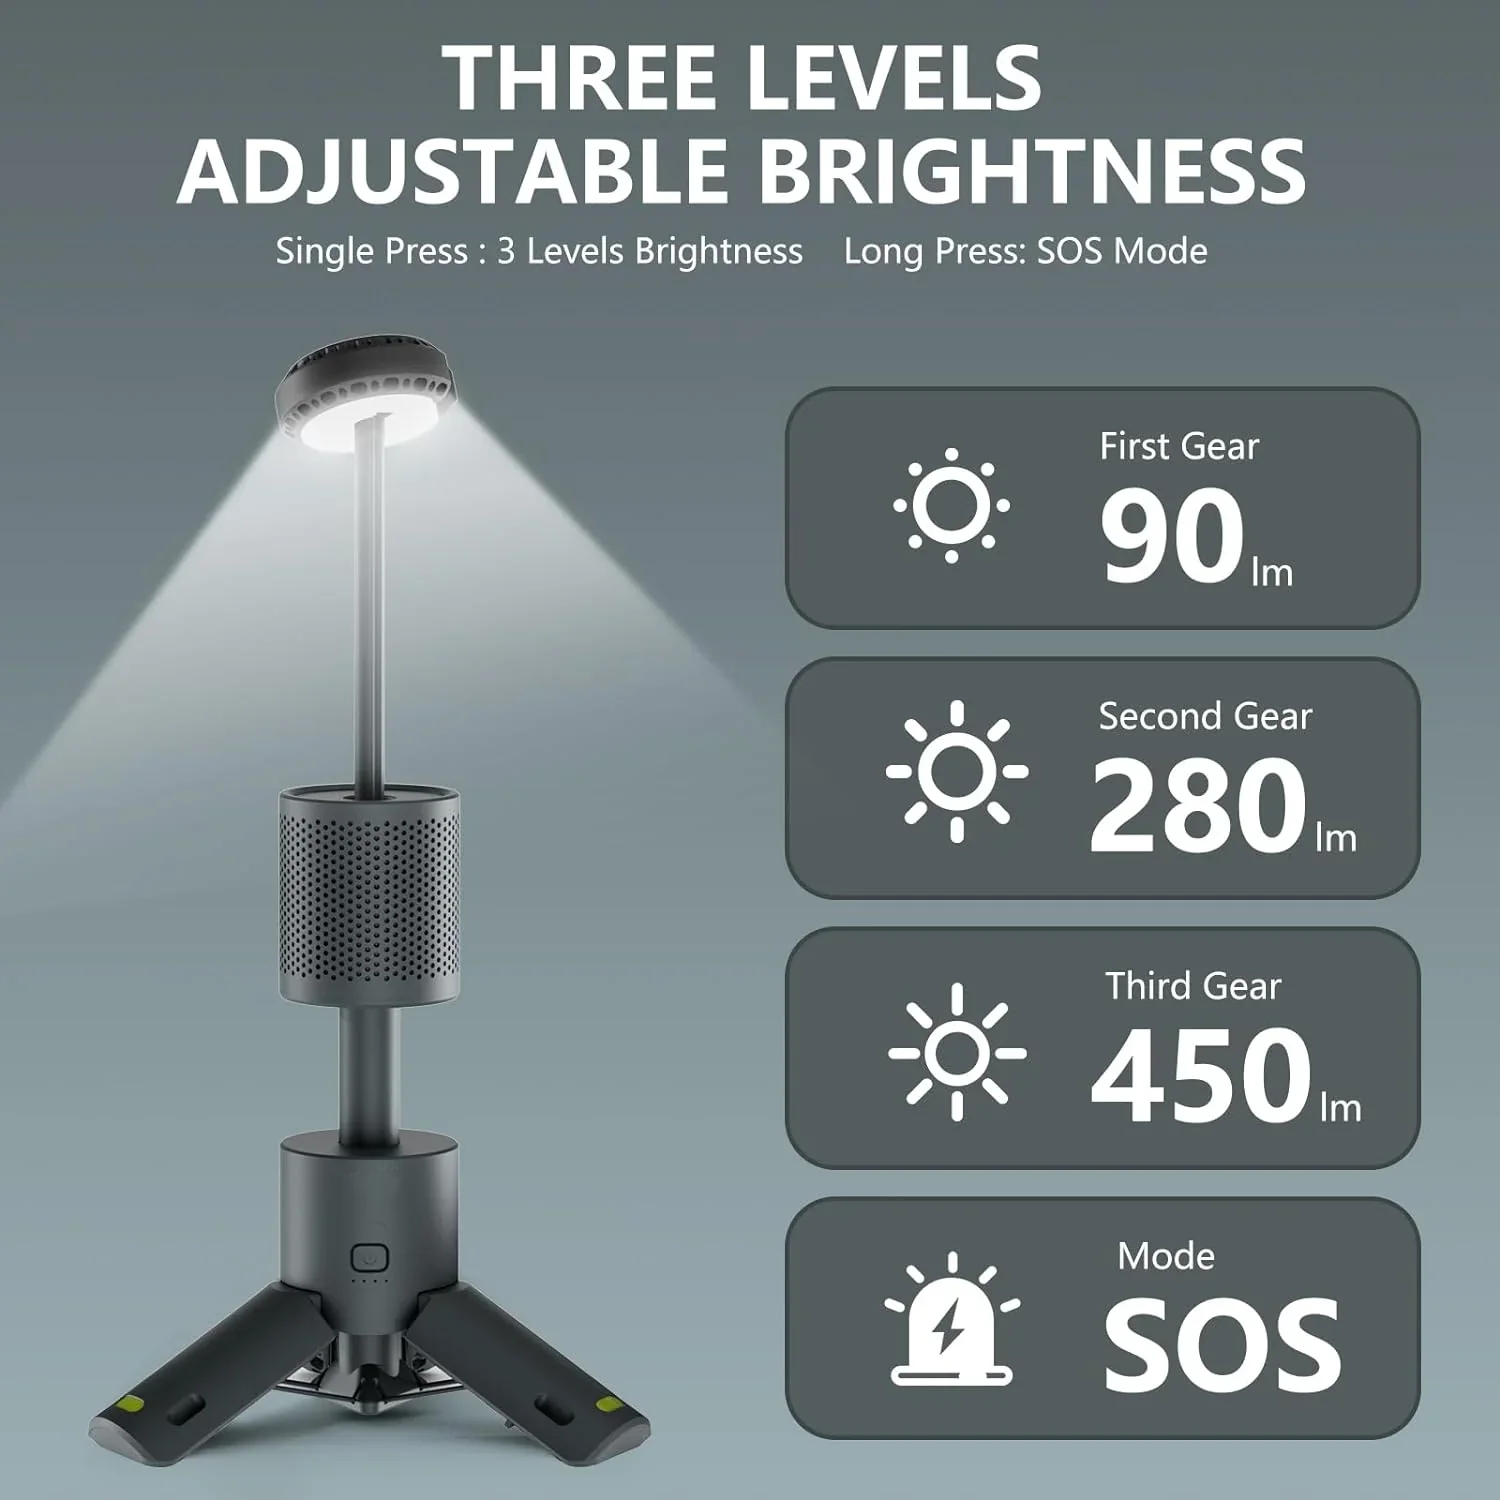 Camping Light with Telescopic Design | 70% OFF + LIMITED SALE